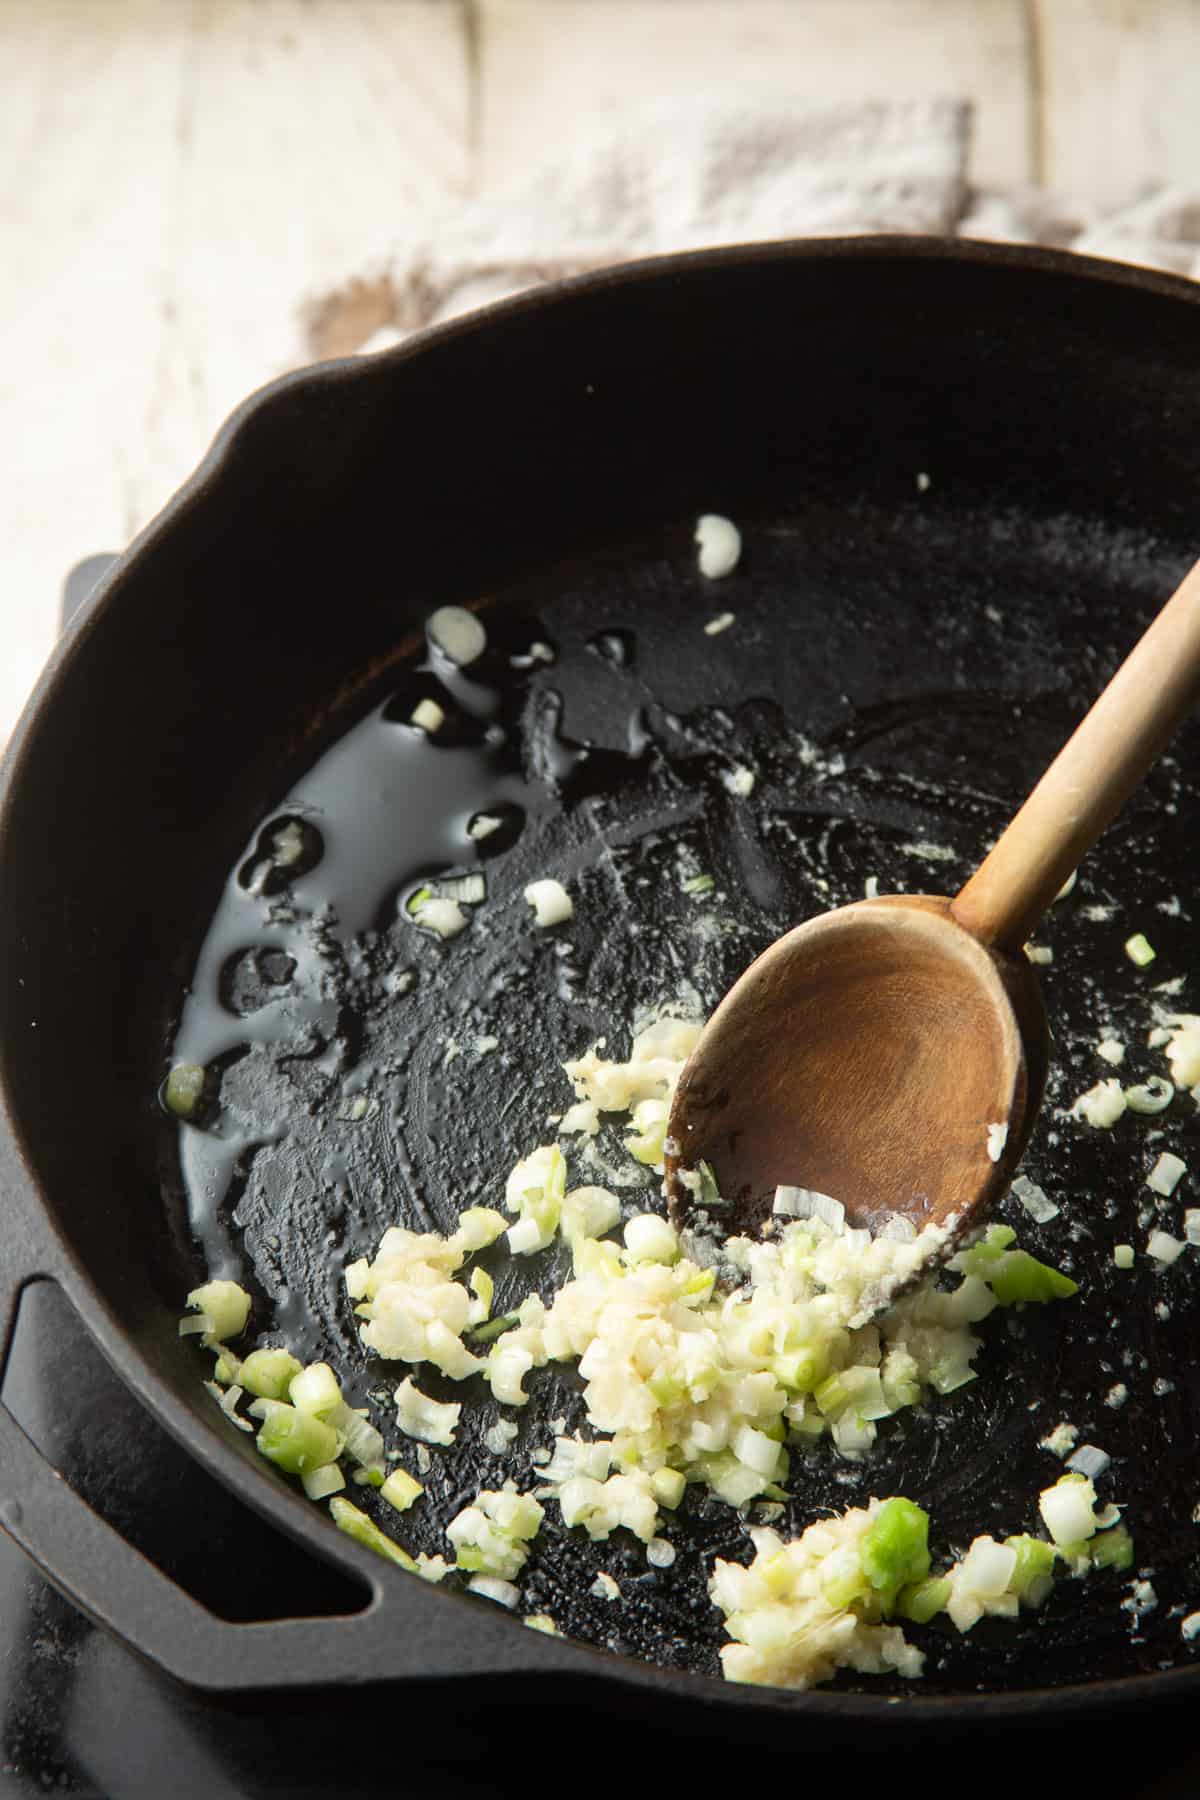 Garlic, ginger and scallions cooking in a skillet.